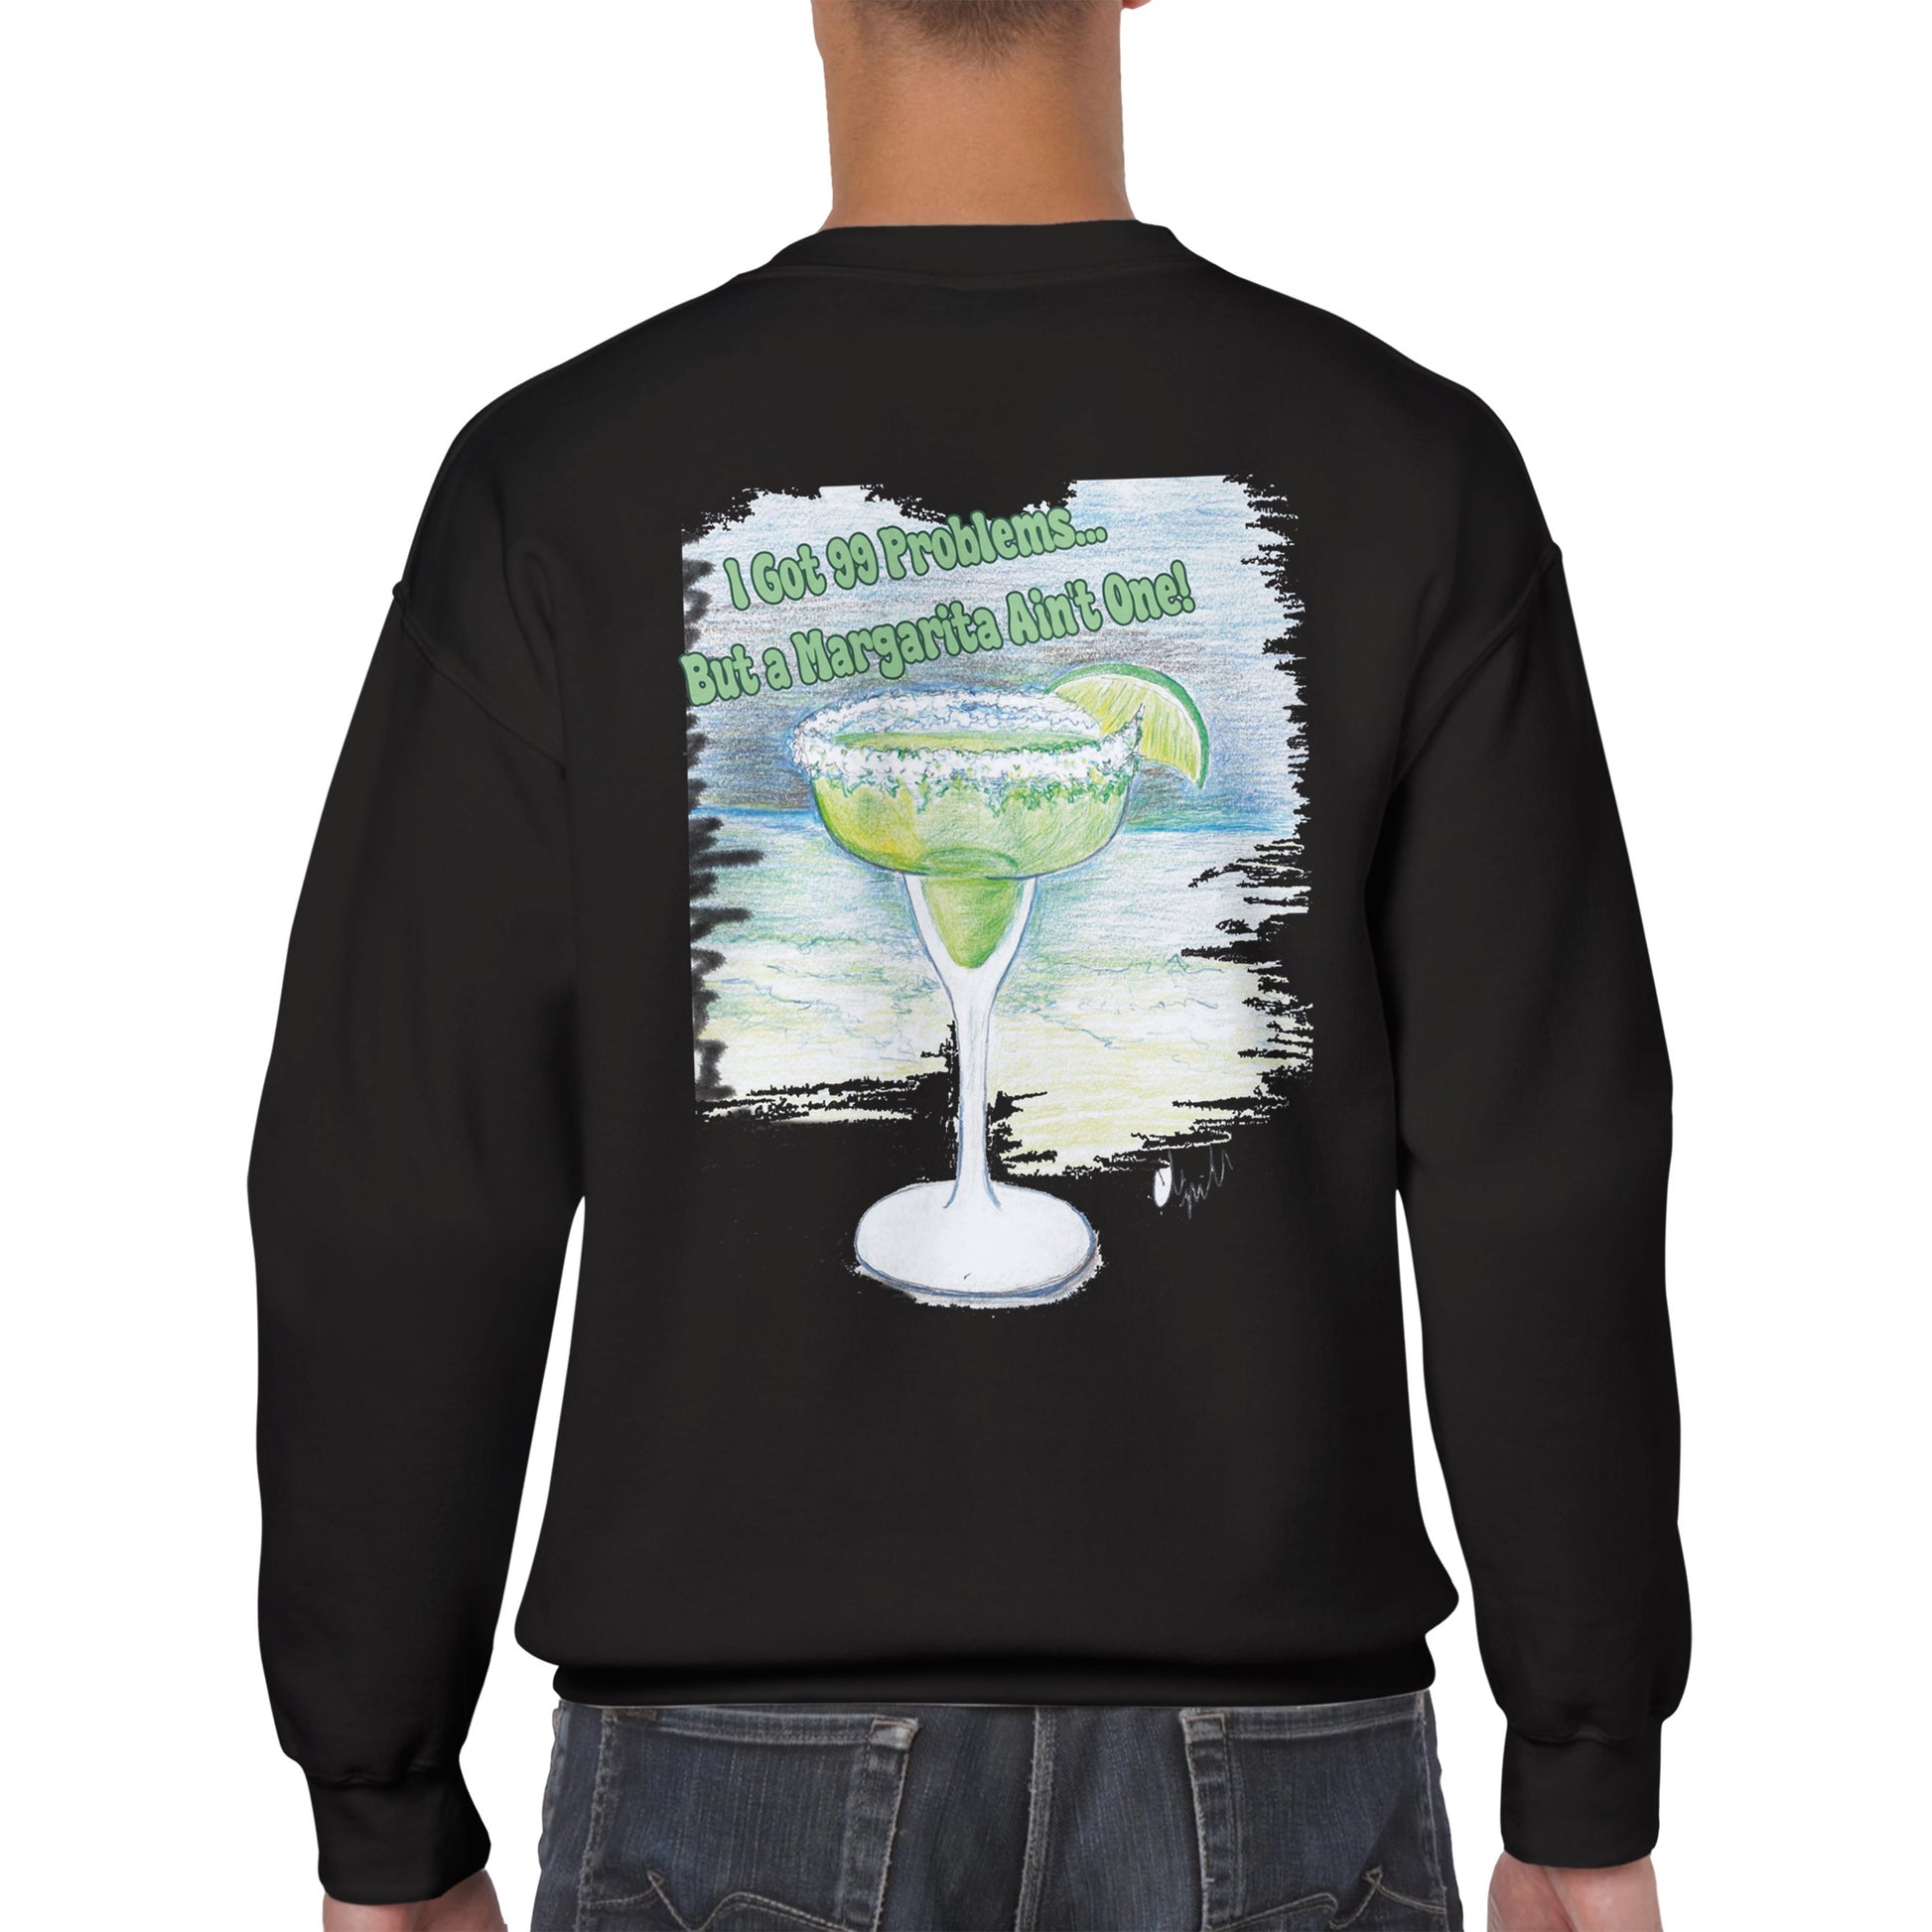 A black Classic Unisex Crewneck sweatshirt with original artwork and motto I Got 99 Problems But a Margarita Ain’t One on back and Whatya Say logo on front from WhatYa Say Apparel a rear view of short haired male model.